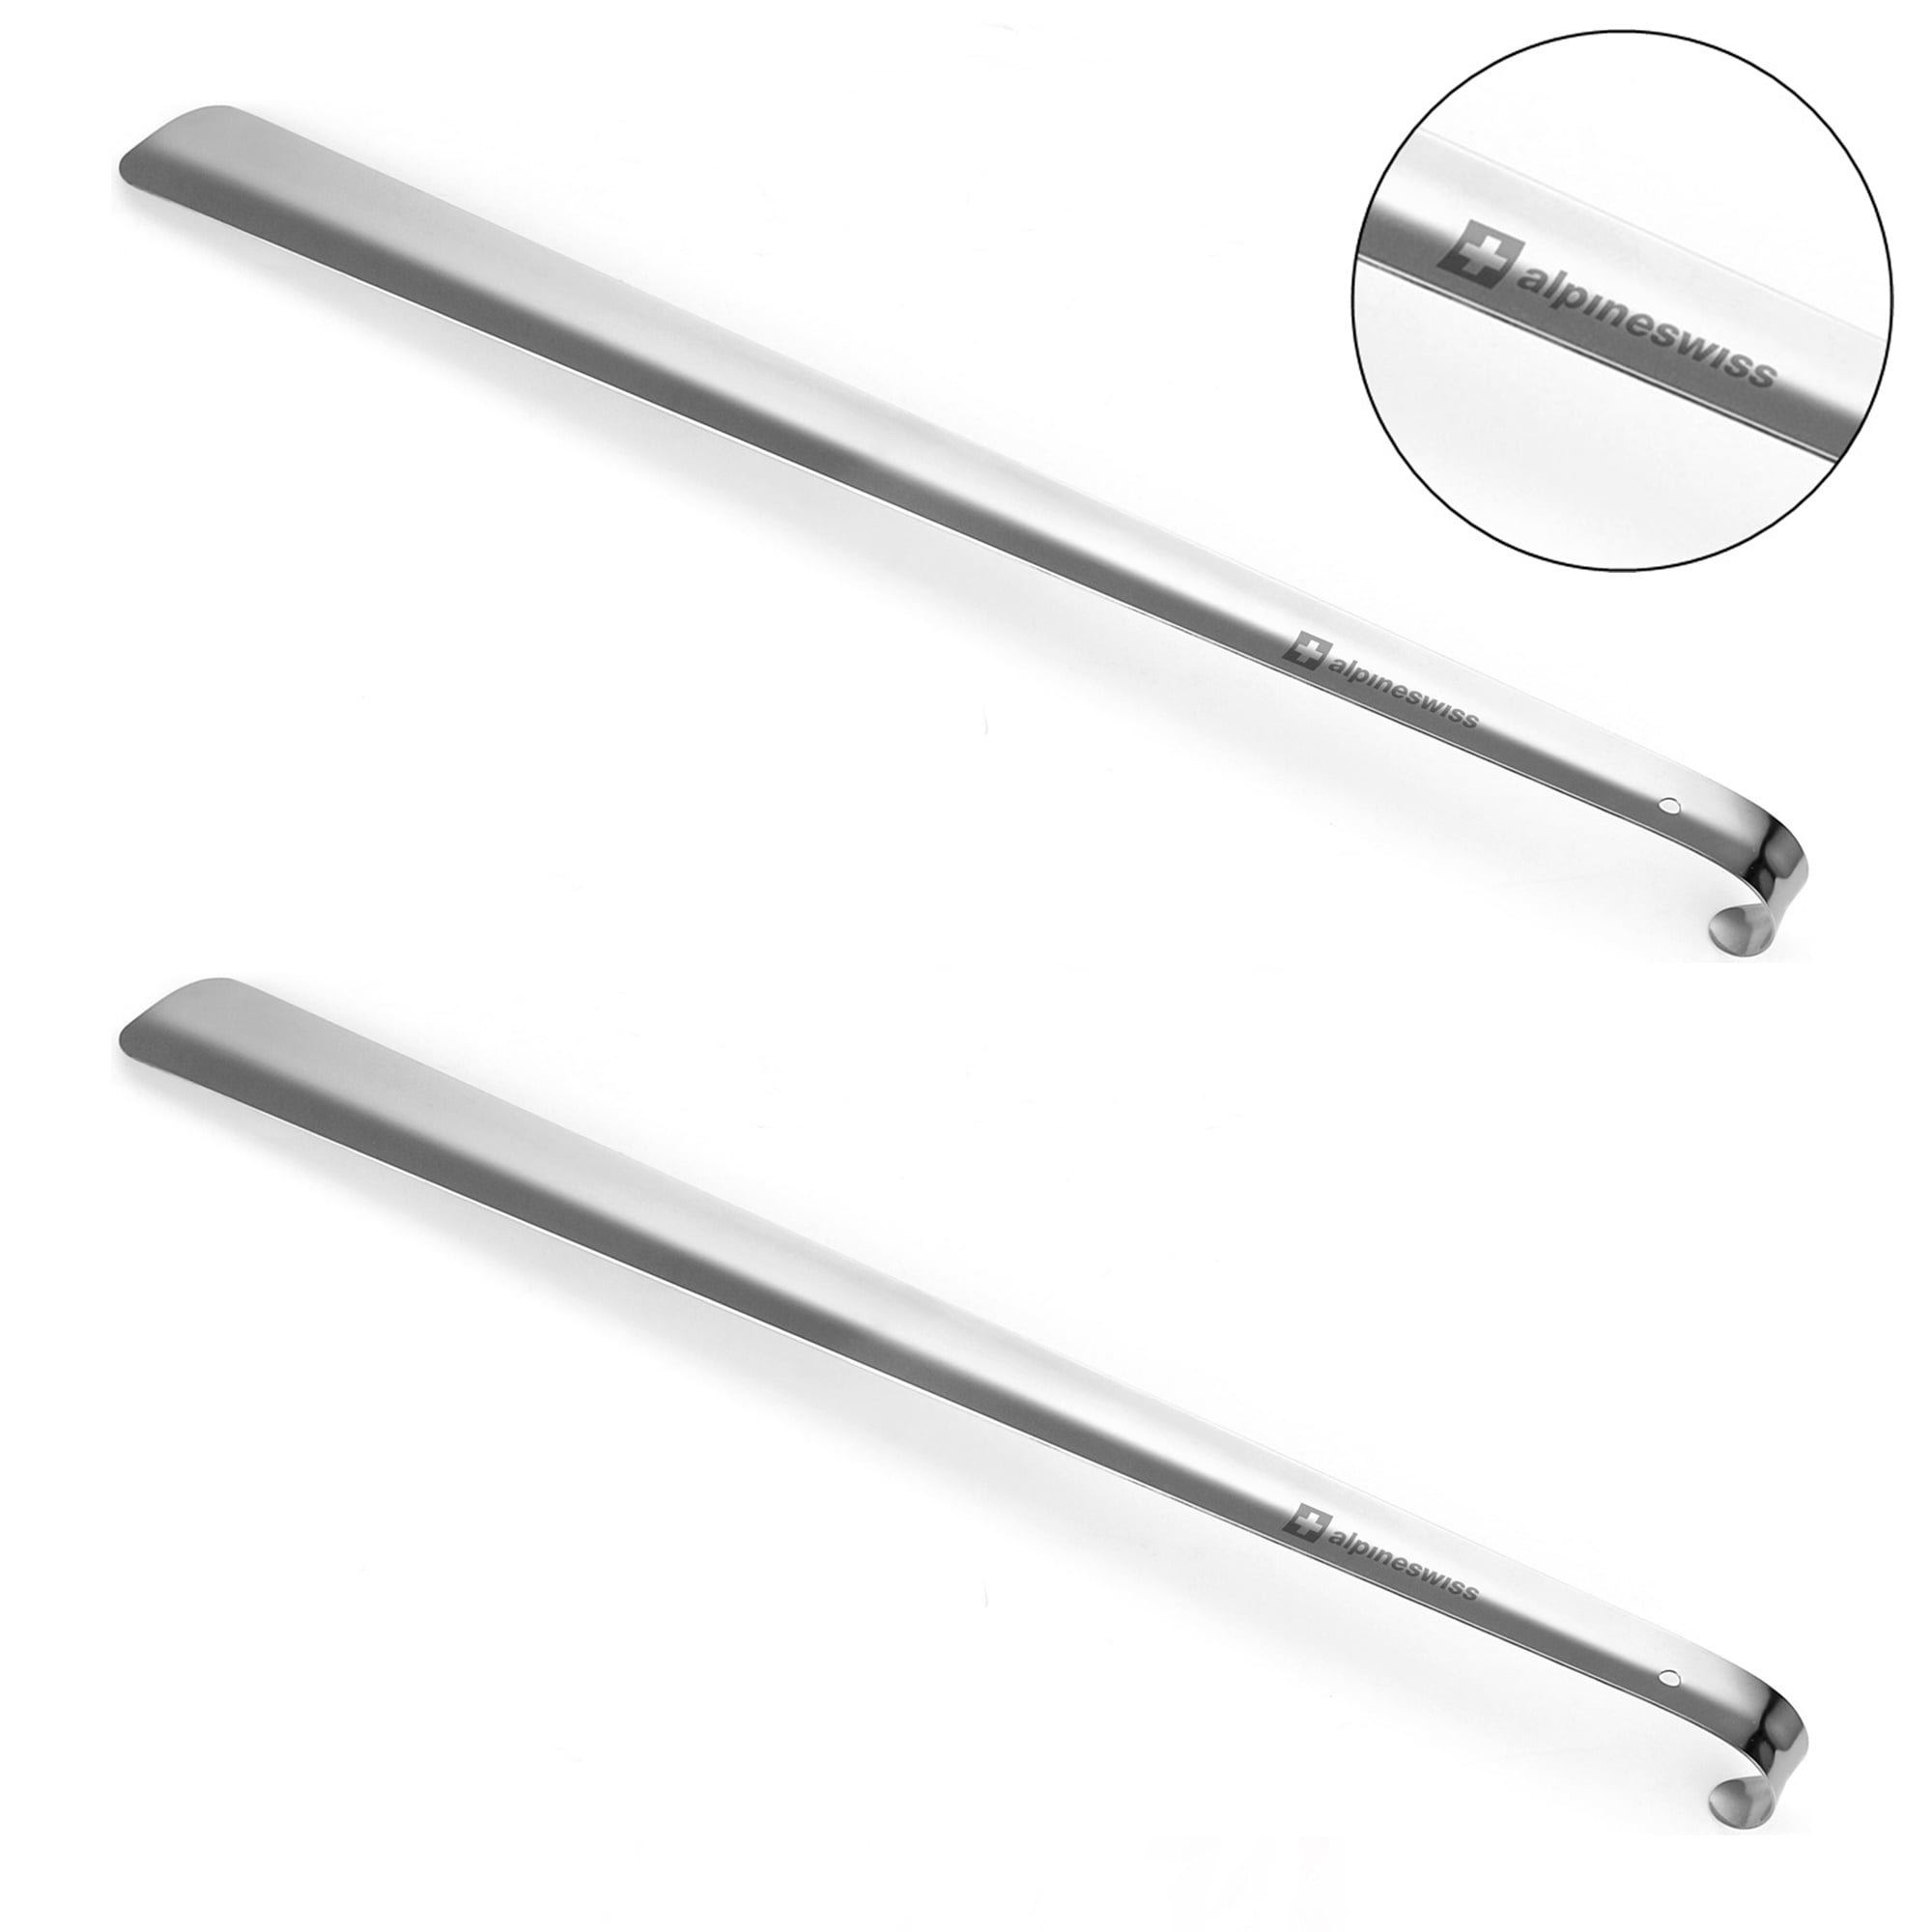 Premium Long Handled Shoe Lifter 16 to 31 Adjustable Expander Shoe Horn -  Extends & Collapses Stainless Steel Telescopic Spring Shoehorn